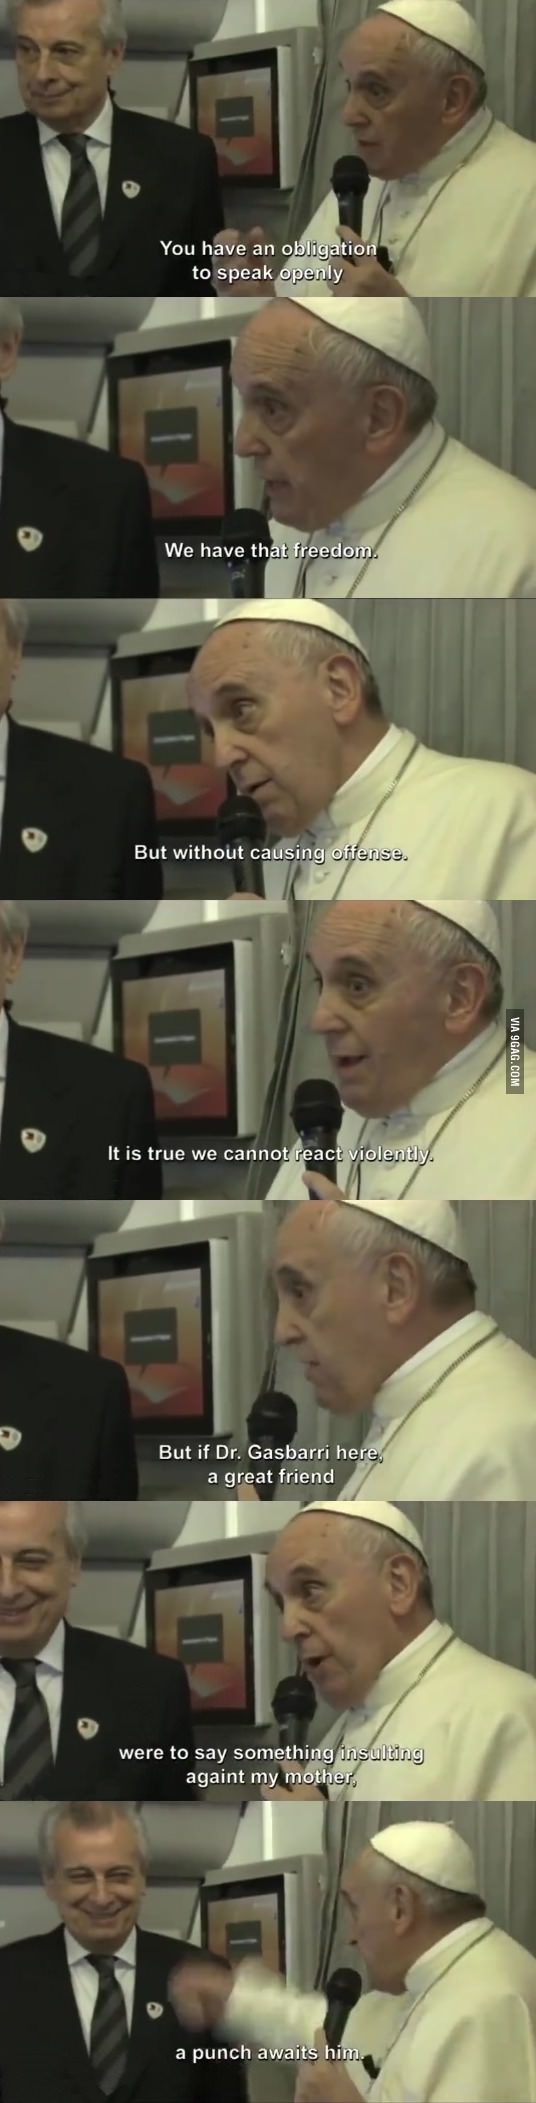 Just Pope Francis